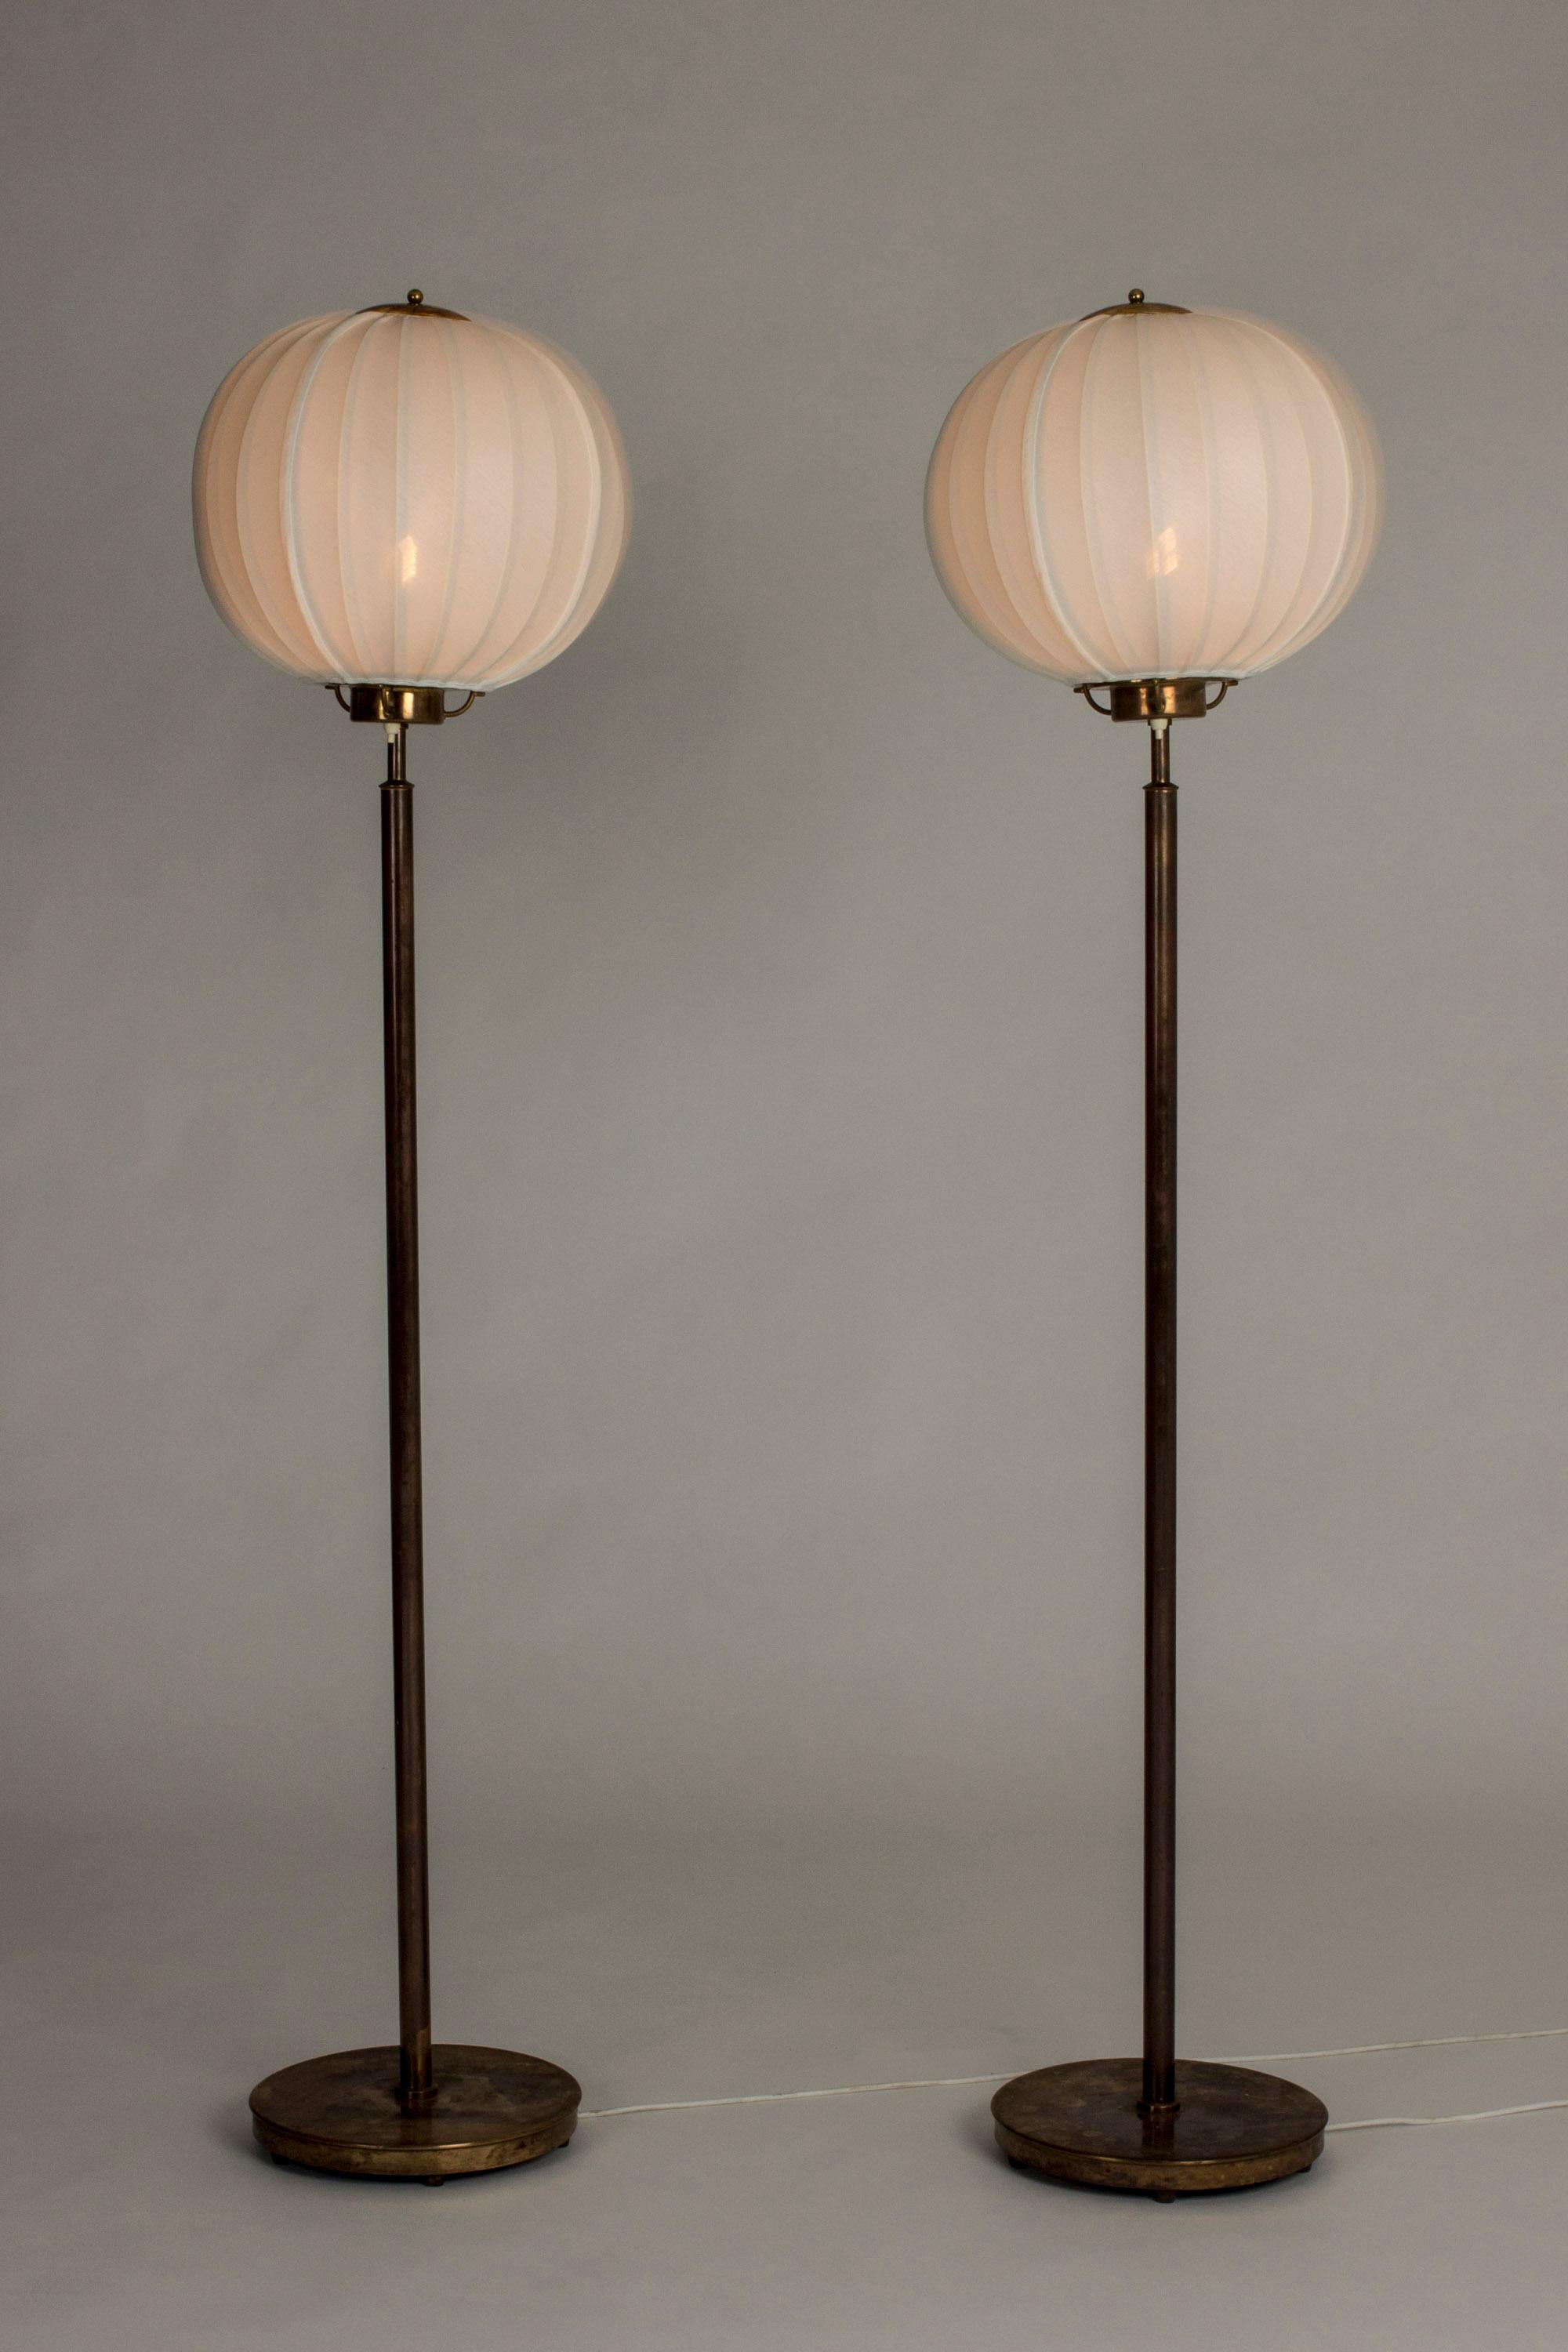 Pair of amazing floor lamps by Bertil Brisborg, made from brass. Great, dark patina. Voluminous shades that spread beautiful light. Very elegant proportions.